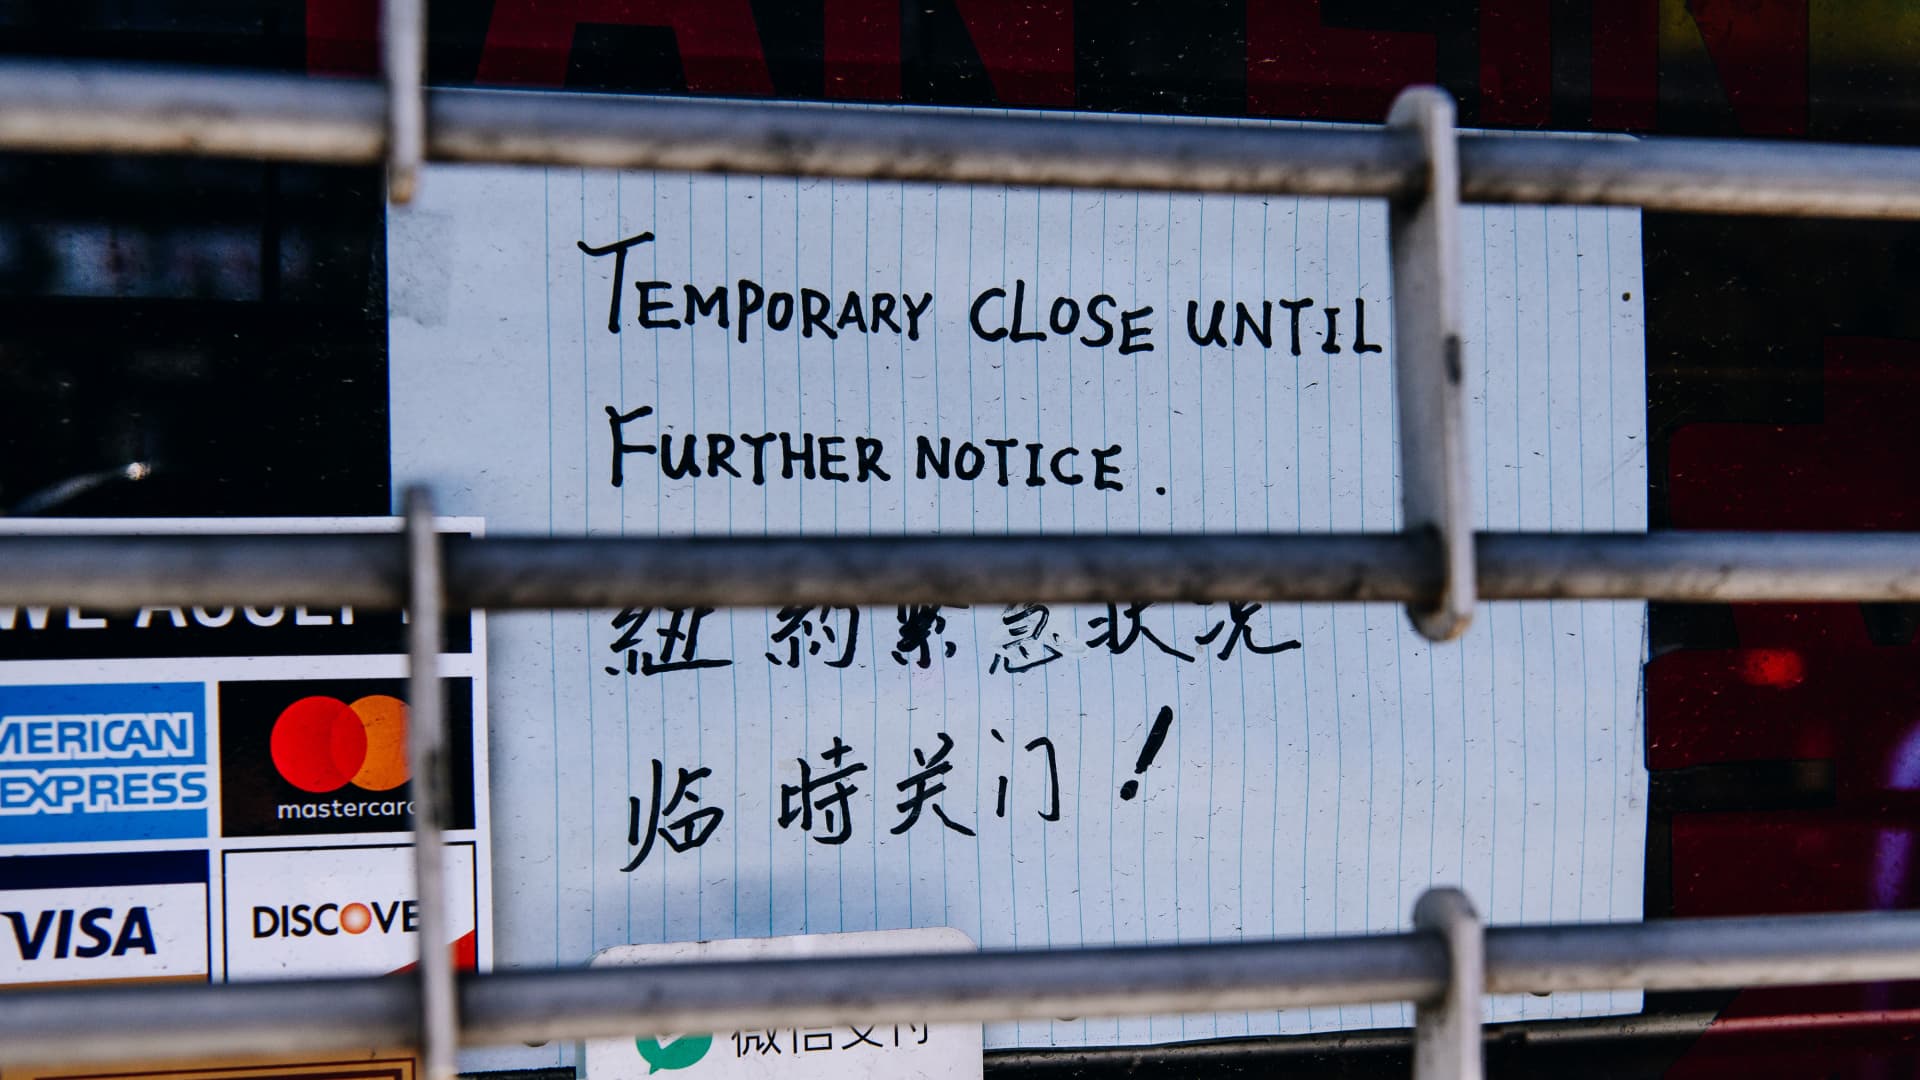 A closed sign is displayed in the window of a business in the Chinatown neighborhood of New York, U.S., on Wednesday, May 27, 2020. Photographer: Nina Westervelt/Bloomberg via Getty Images